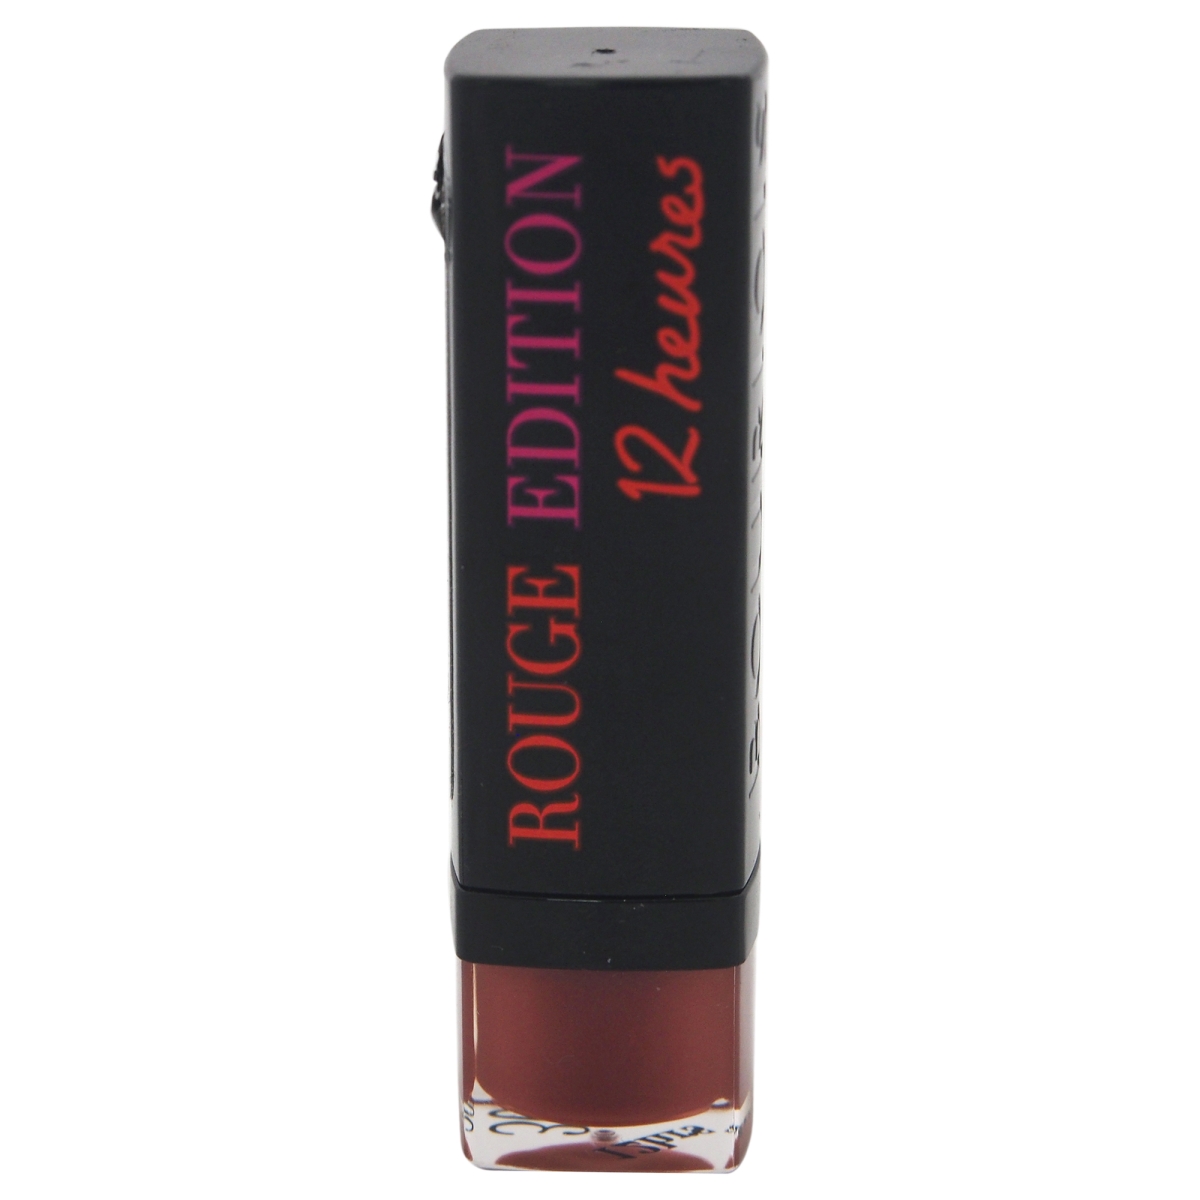 W-c-9703 0.12 Oz No. 30 Rouge Edition 12 Hours Prune Afterwork Lipstick For Women